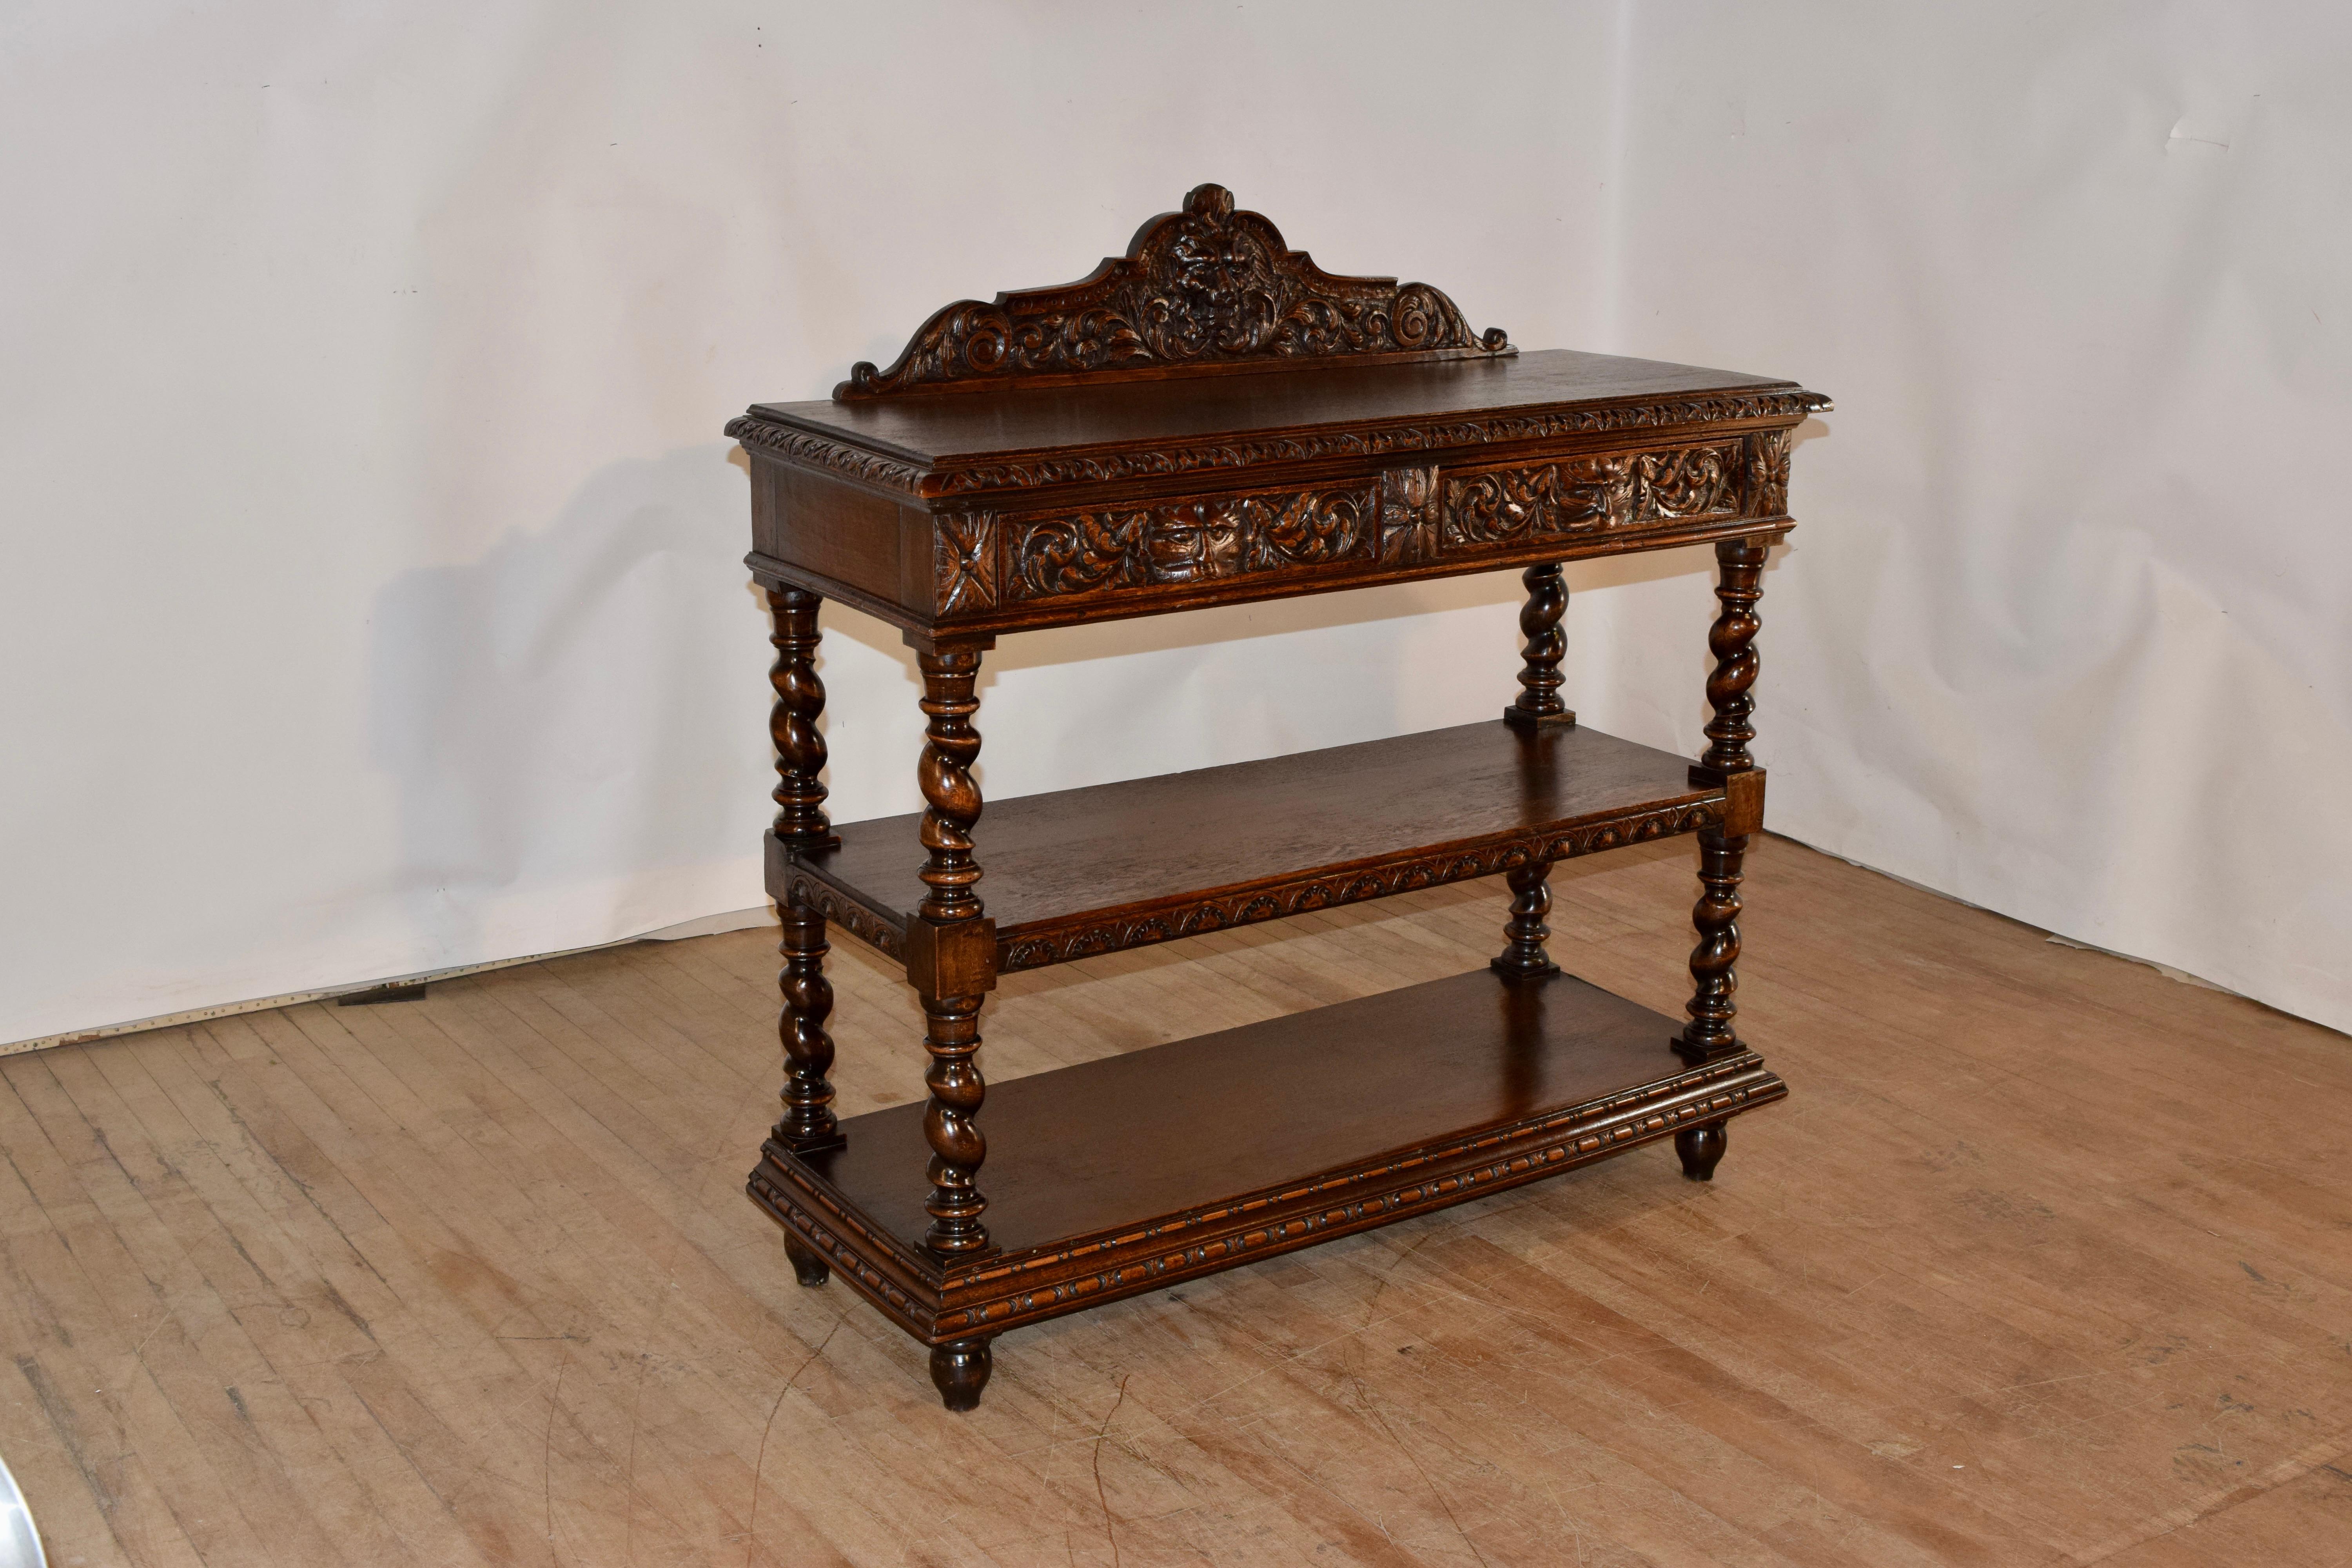 19th century oak dessert buffet from France with a lovely detailed hand carved and scalloped backsplash, over three shelves. The top is wonderfully grained and has a hand beveled and carved decorated edge. The sides are simple and the front apron